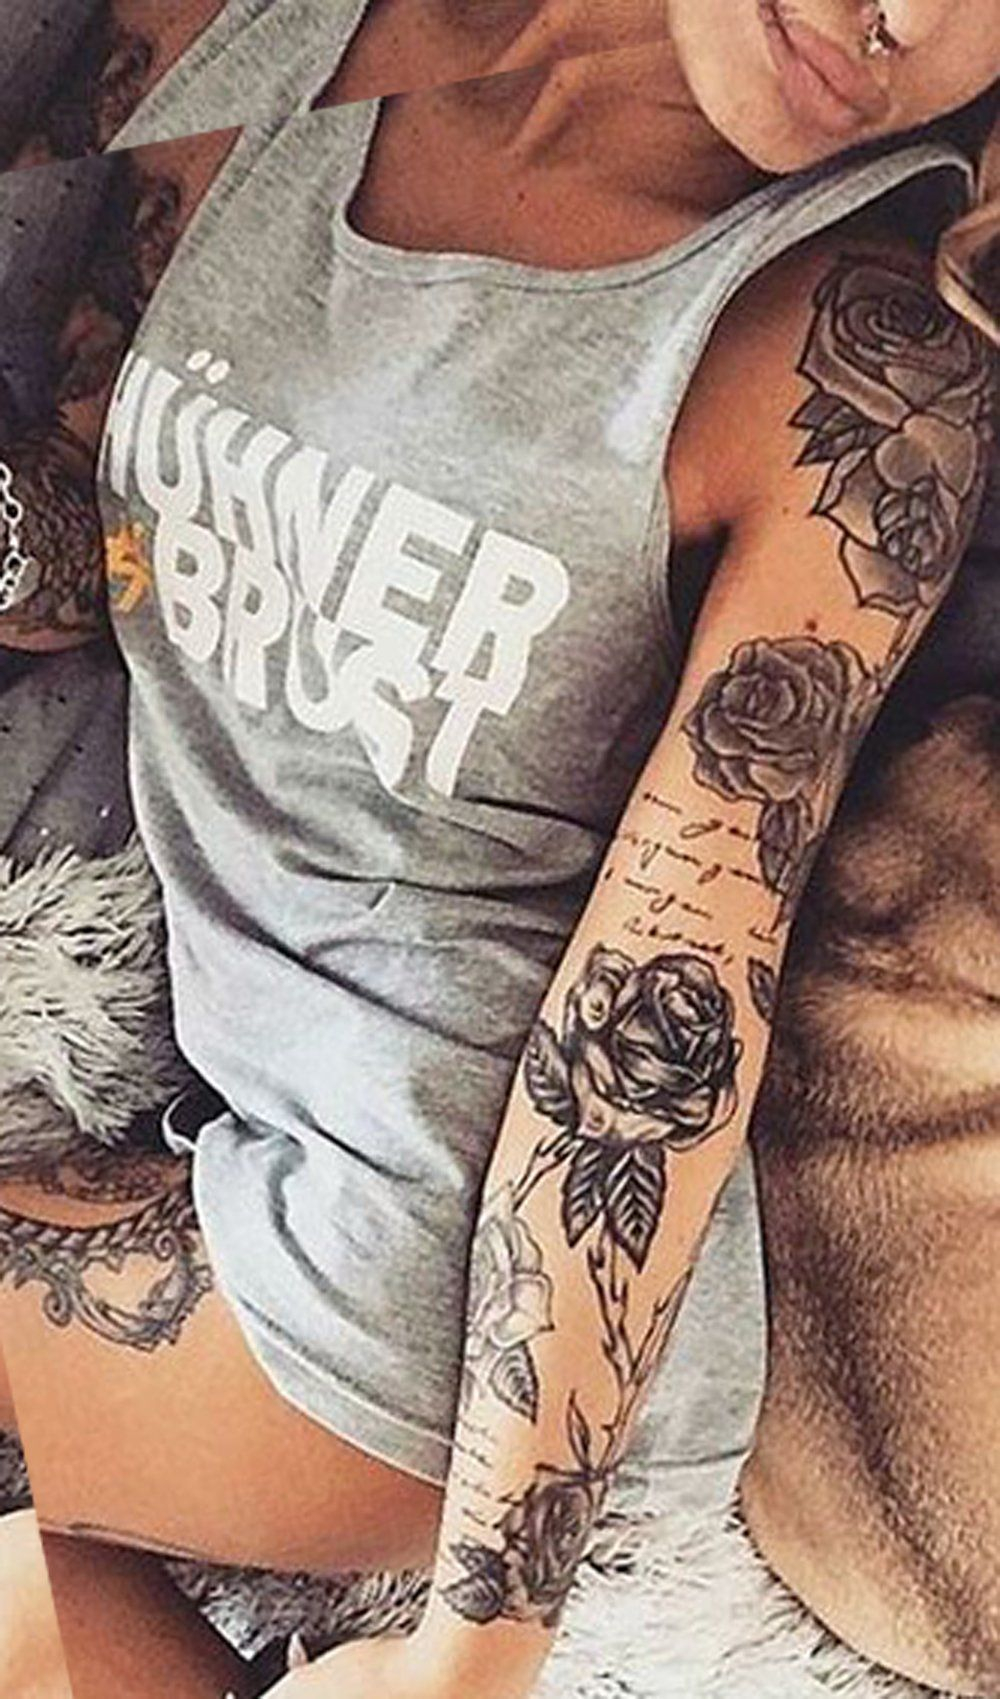 Vintage Realistic Rose Full Arm Sleeve Tattoo Ideas For Women in dimensions 1000 X 1699